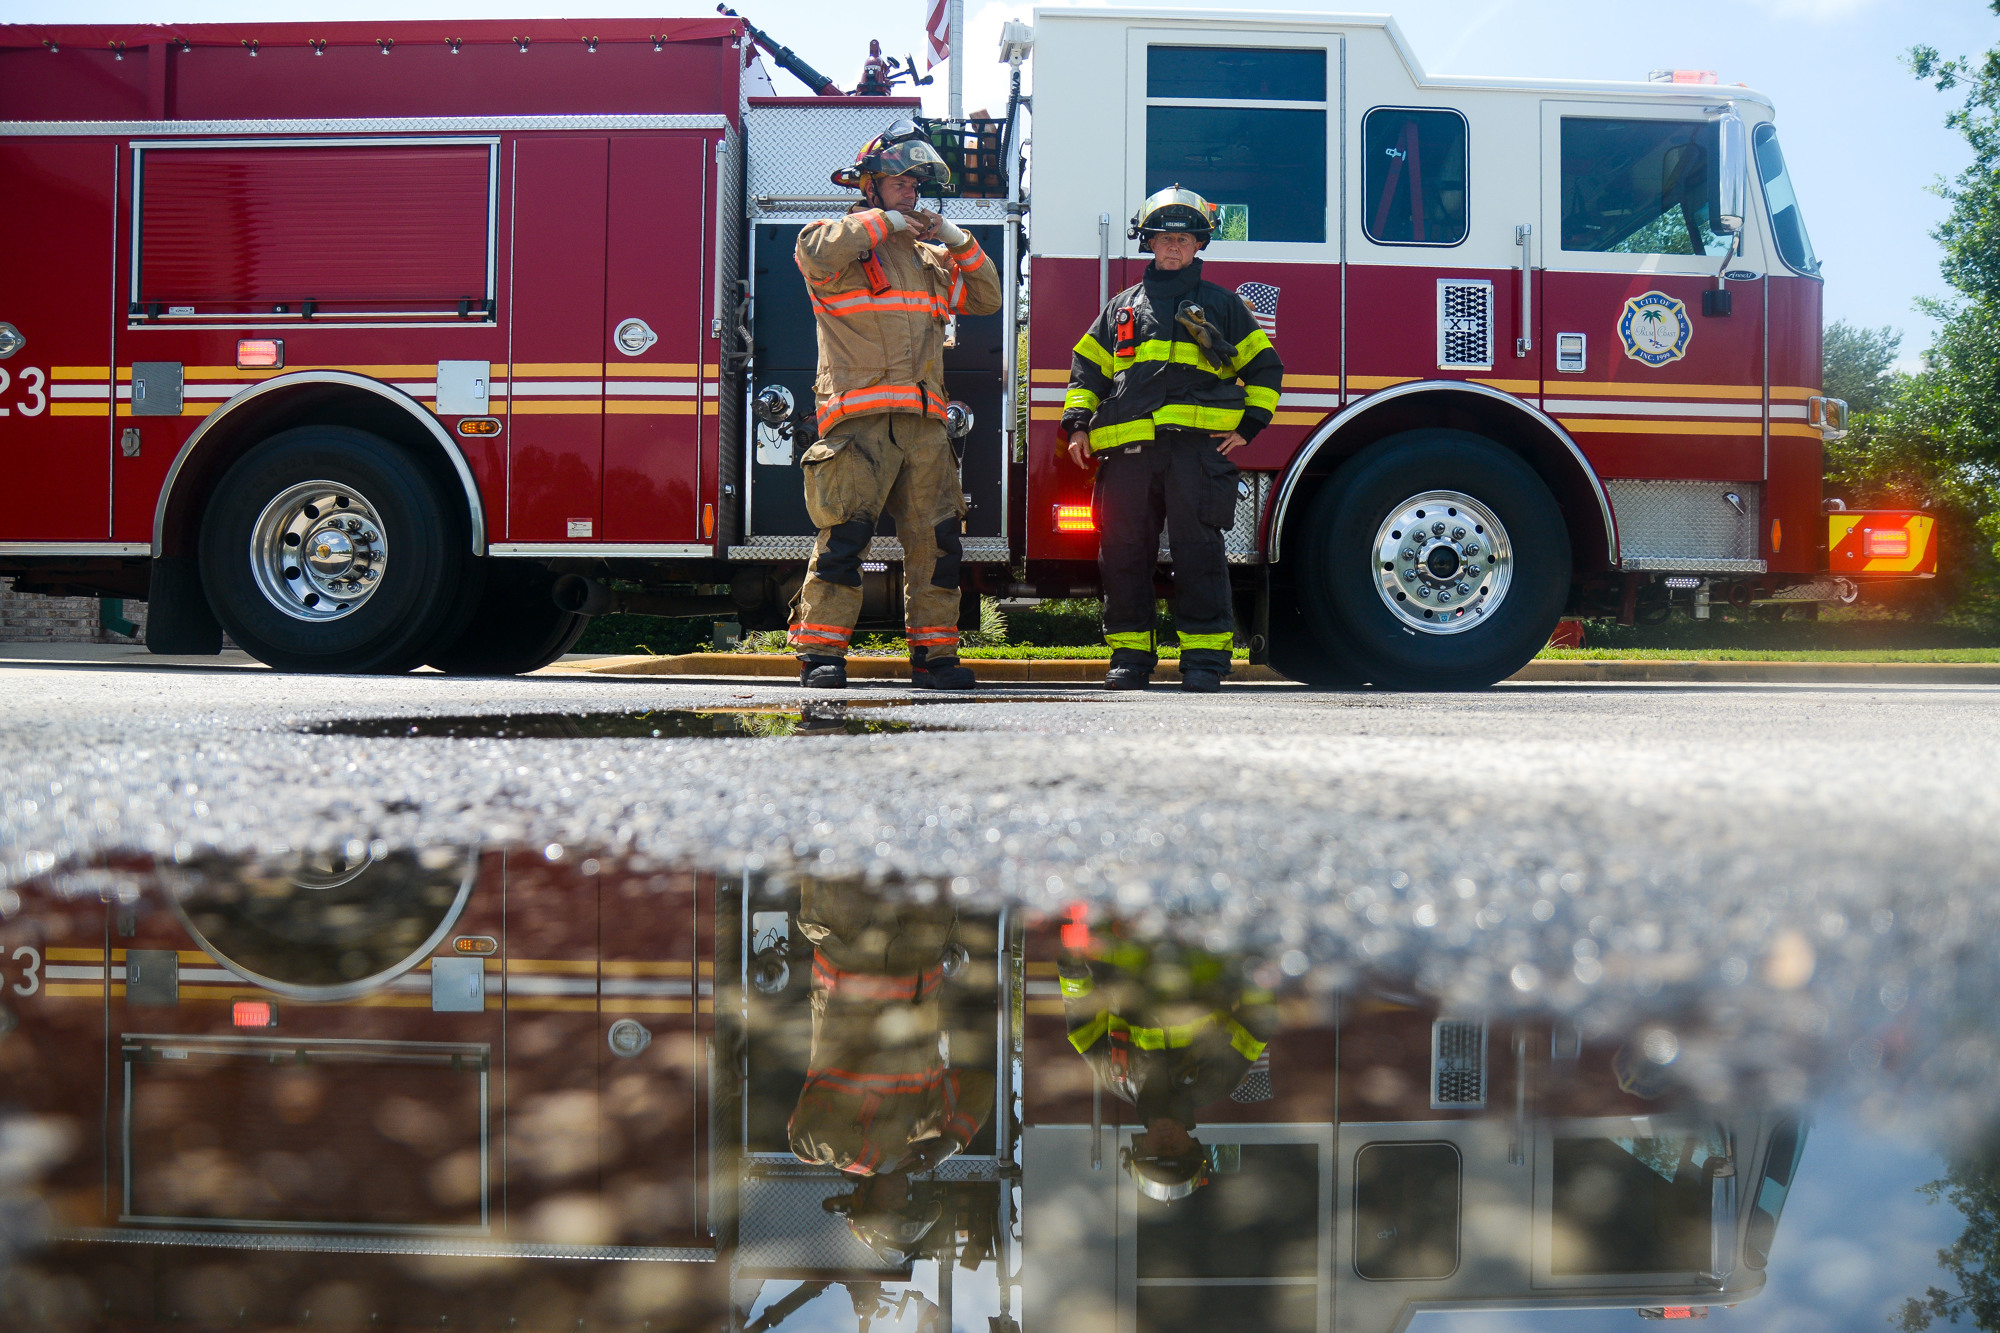 Lt. Jason Wagner and firefighter-paramedic Robert Ballou stand by Fire Engine 23. The duo has been partnered together for over five years with the department. Photo by Paige Wilson